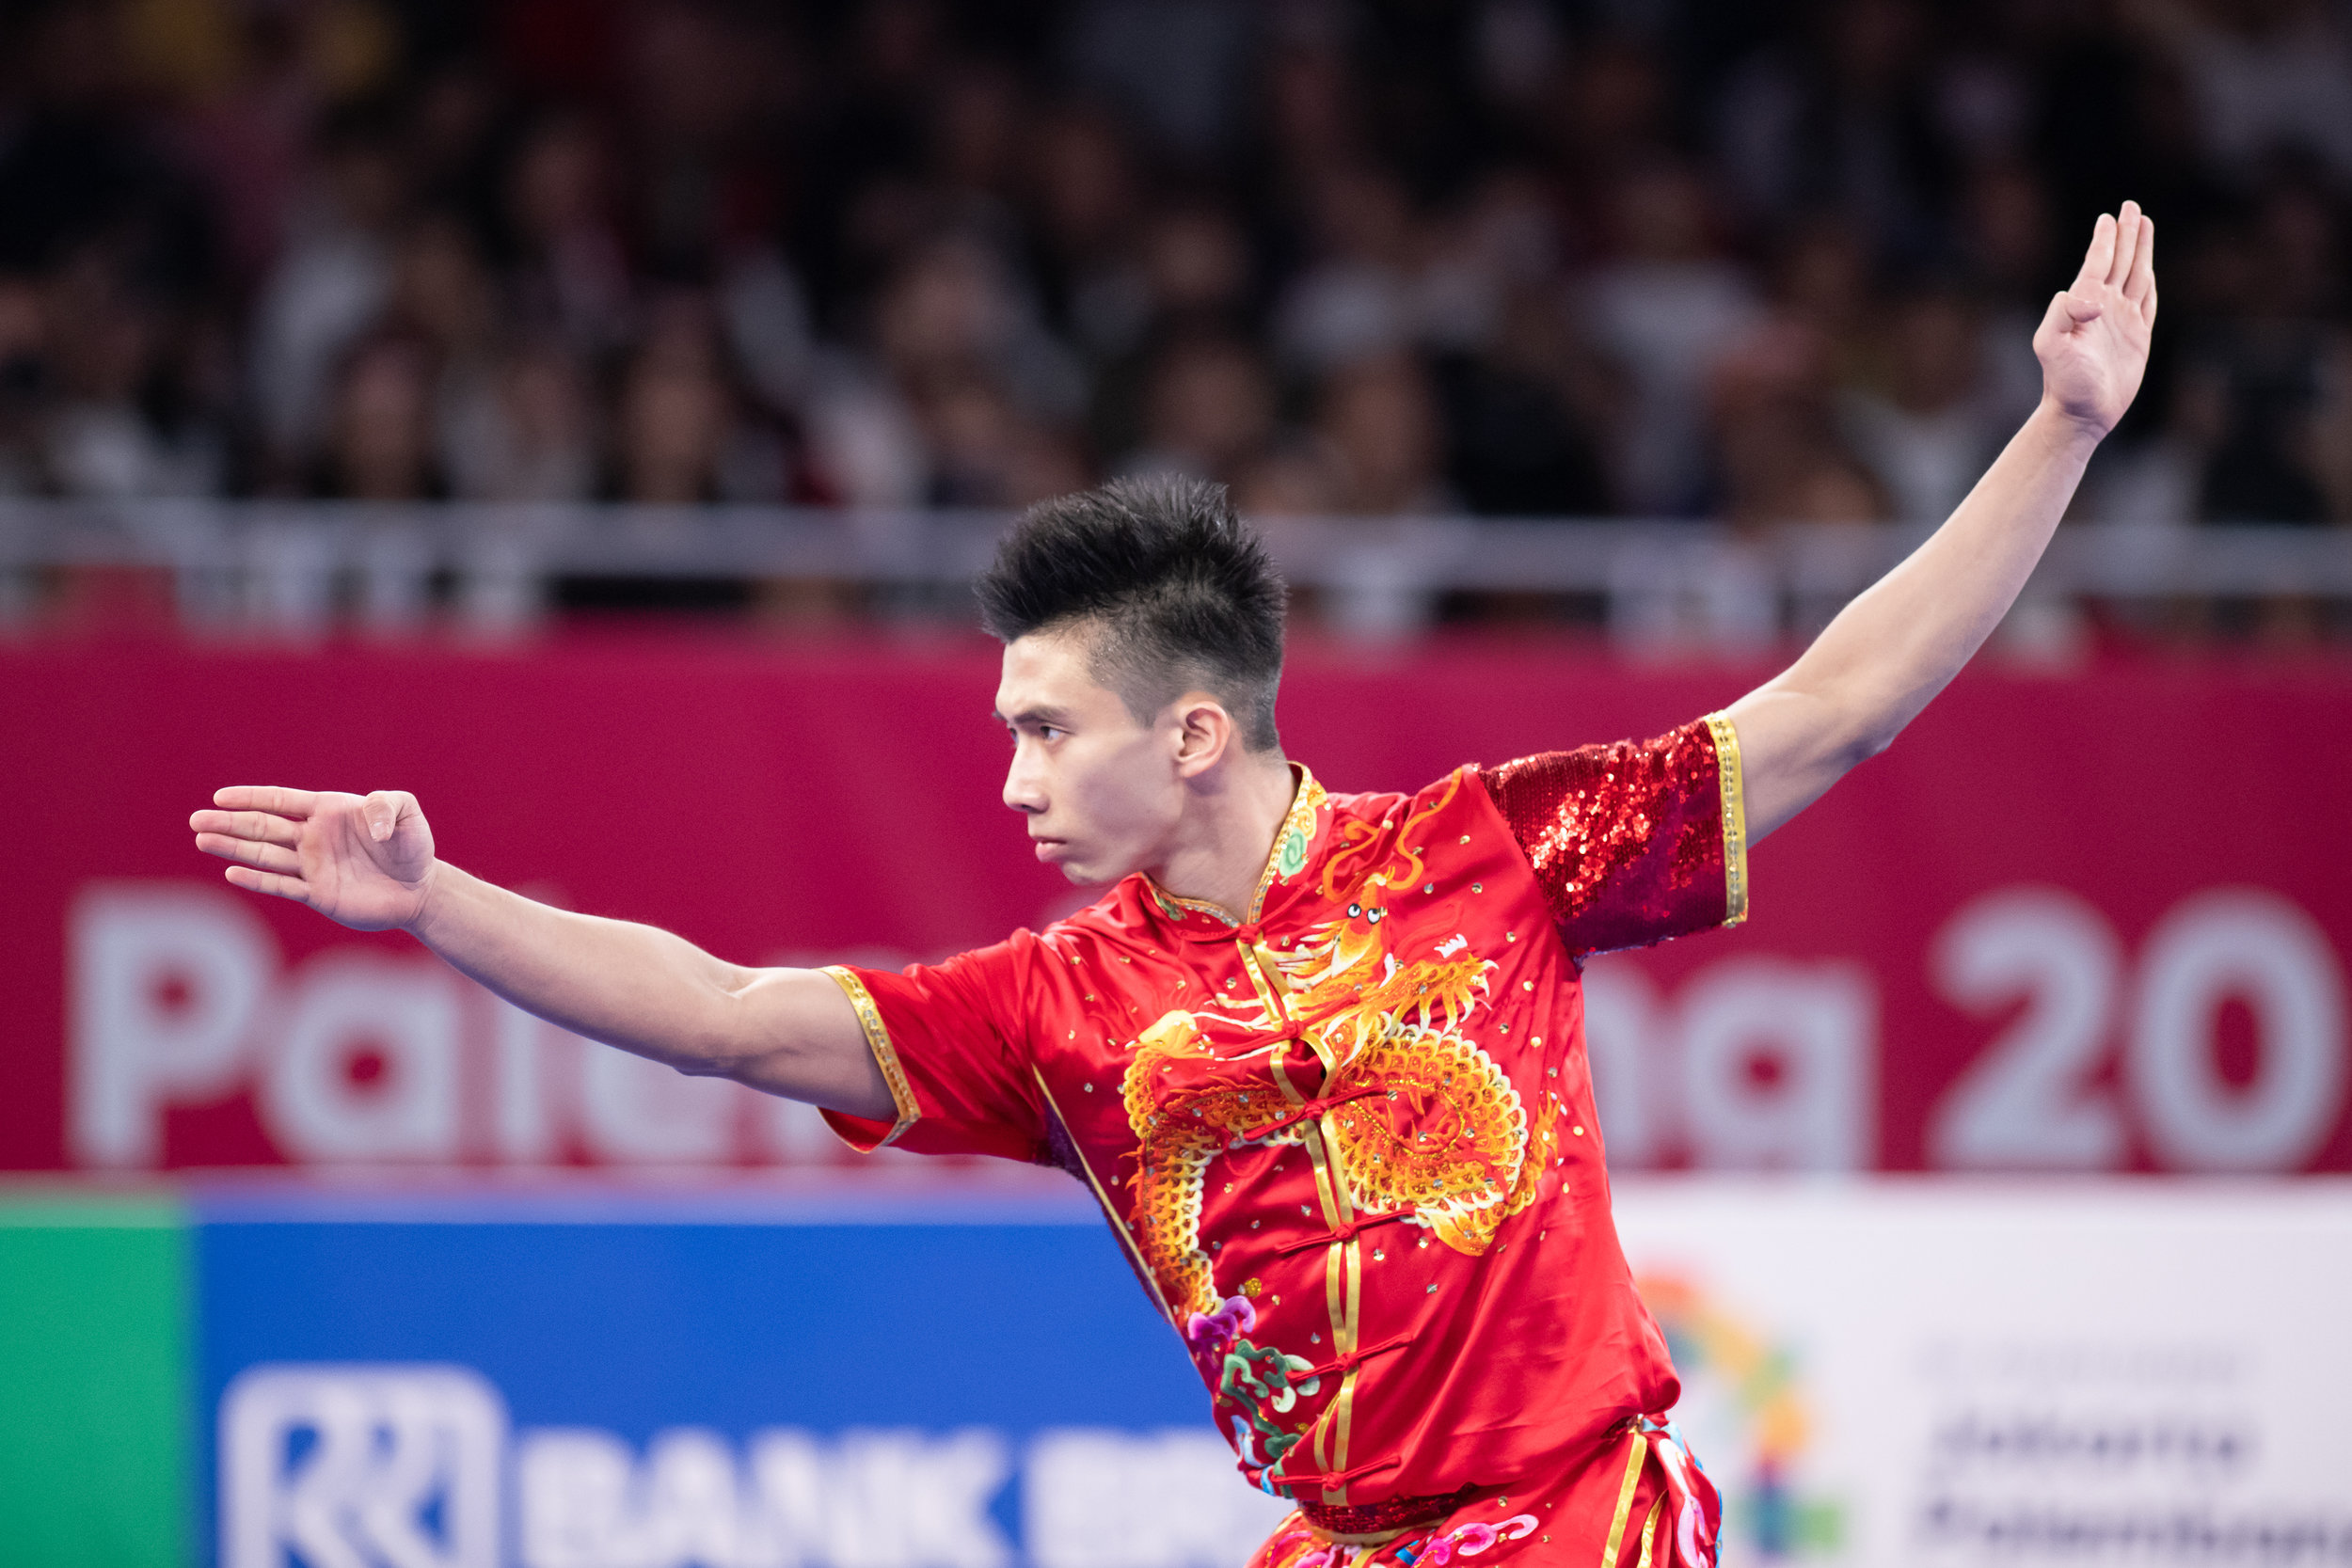 A Singaporean wushu exponent during the Men's Changquan event of the Asian Games at the Jakarta International Expo.